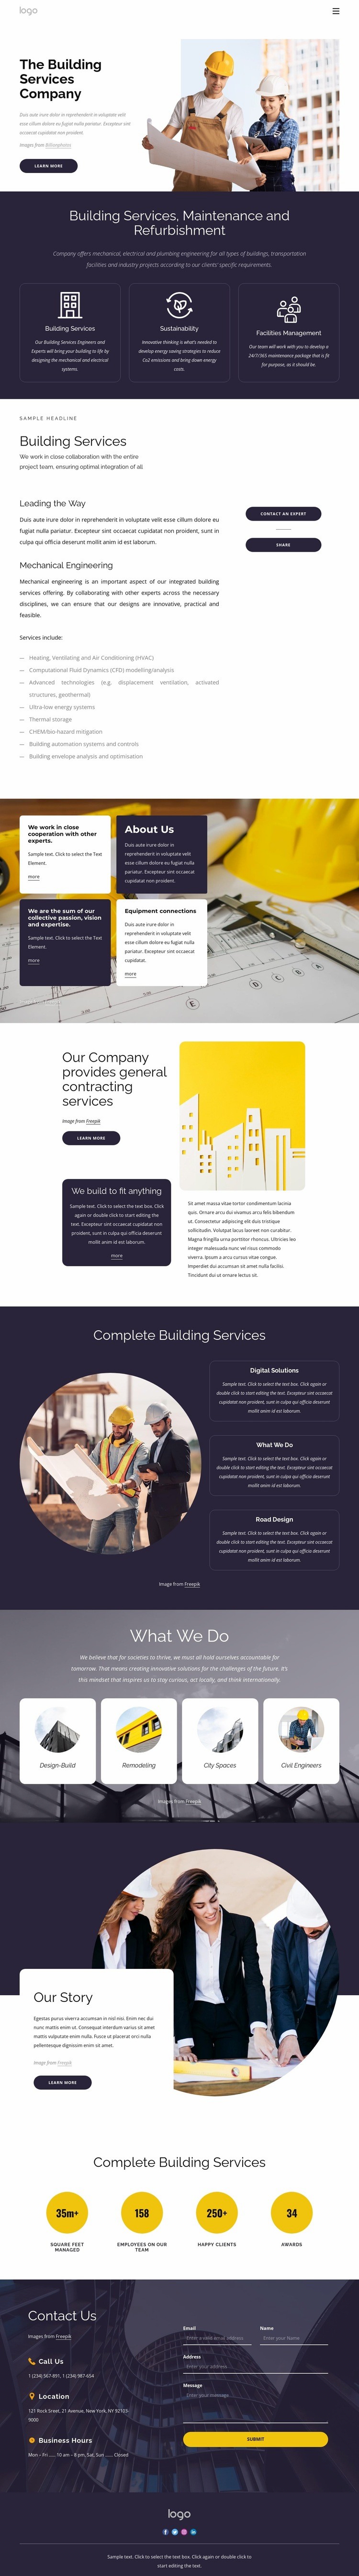 The building services company Web Page Design